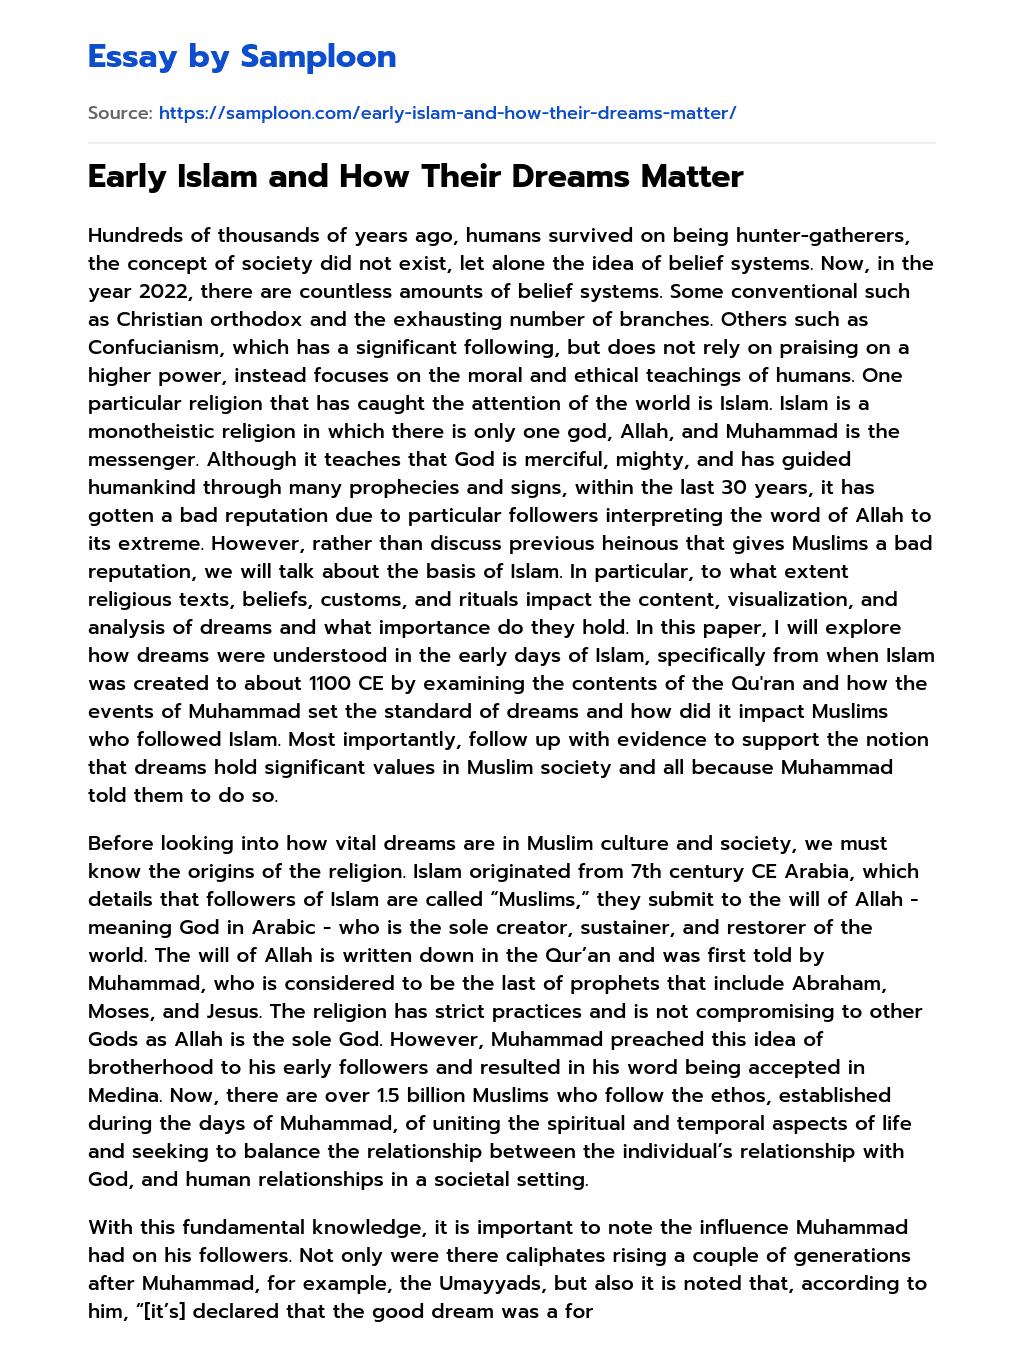 Early Islam and How Their Dreams Matter essay